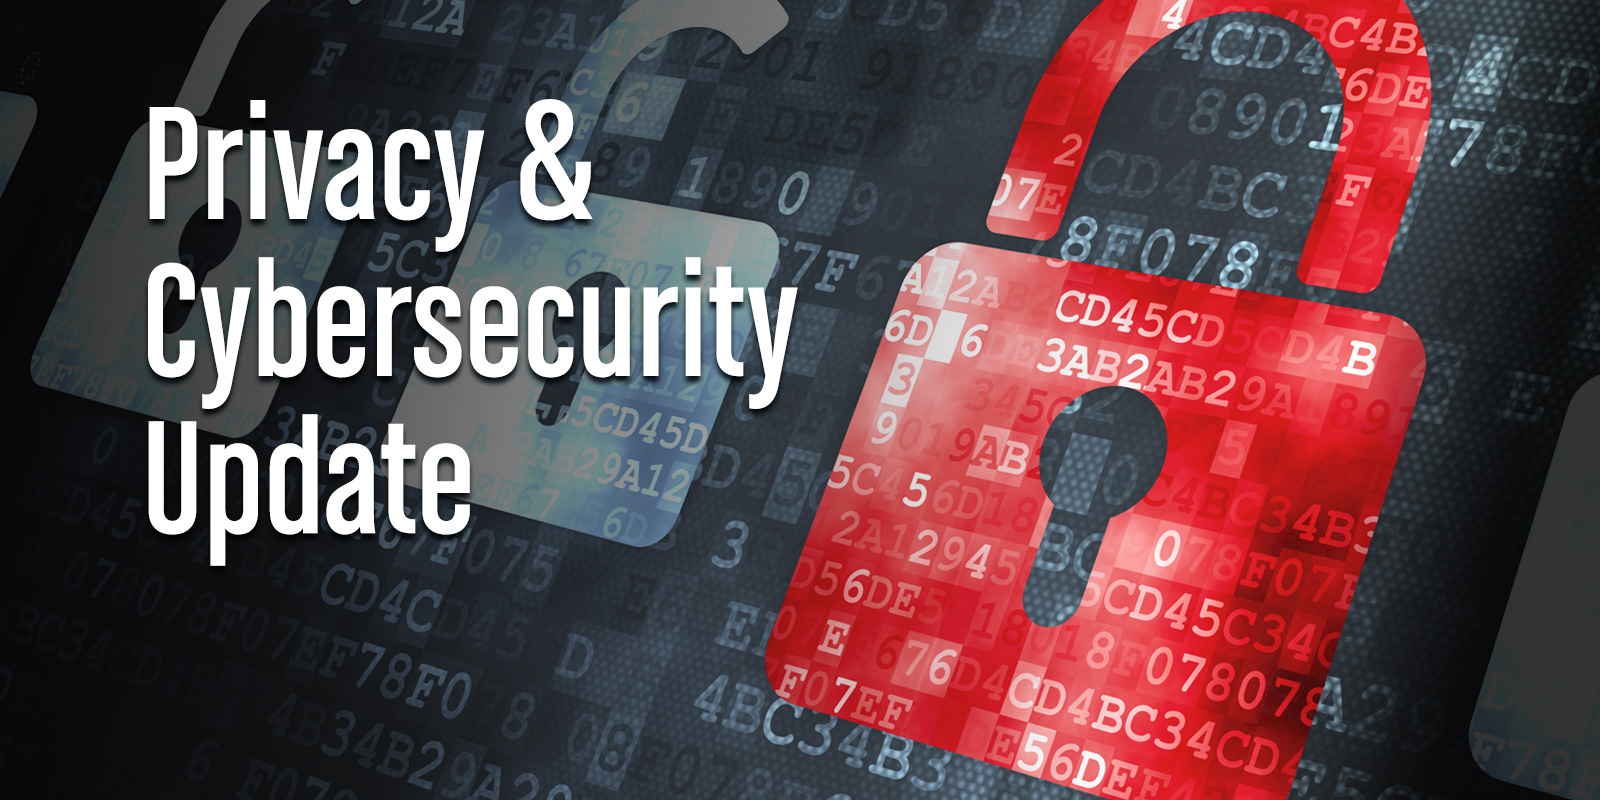 Global Privacy & Cybersecurity Update Vol. 13